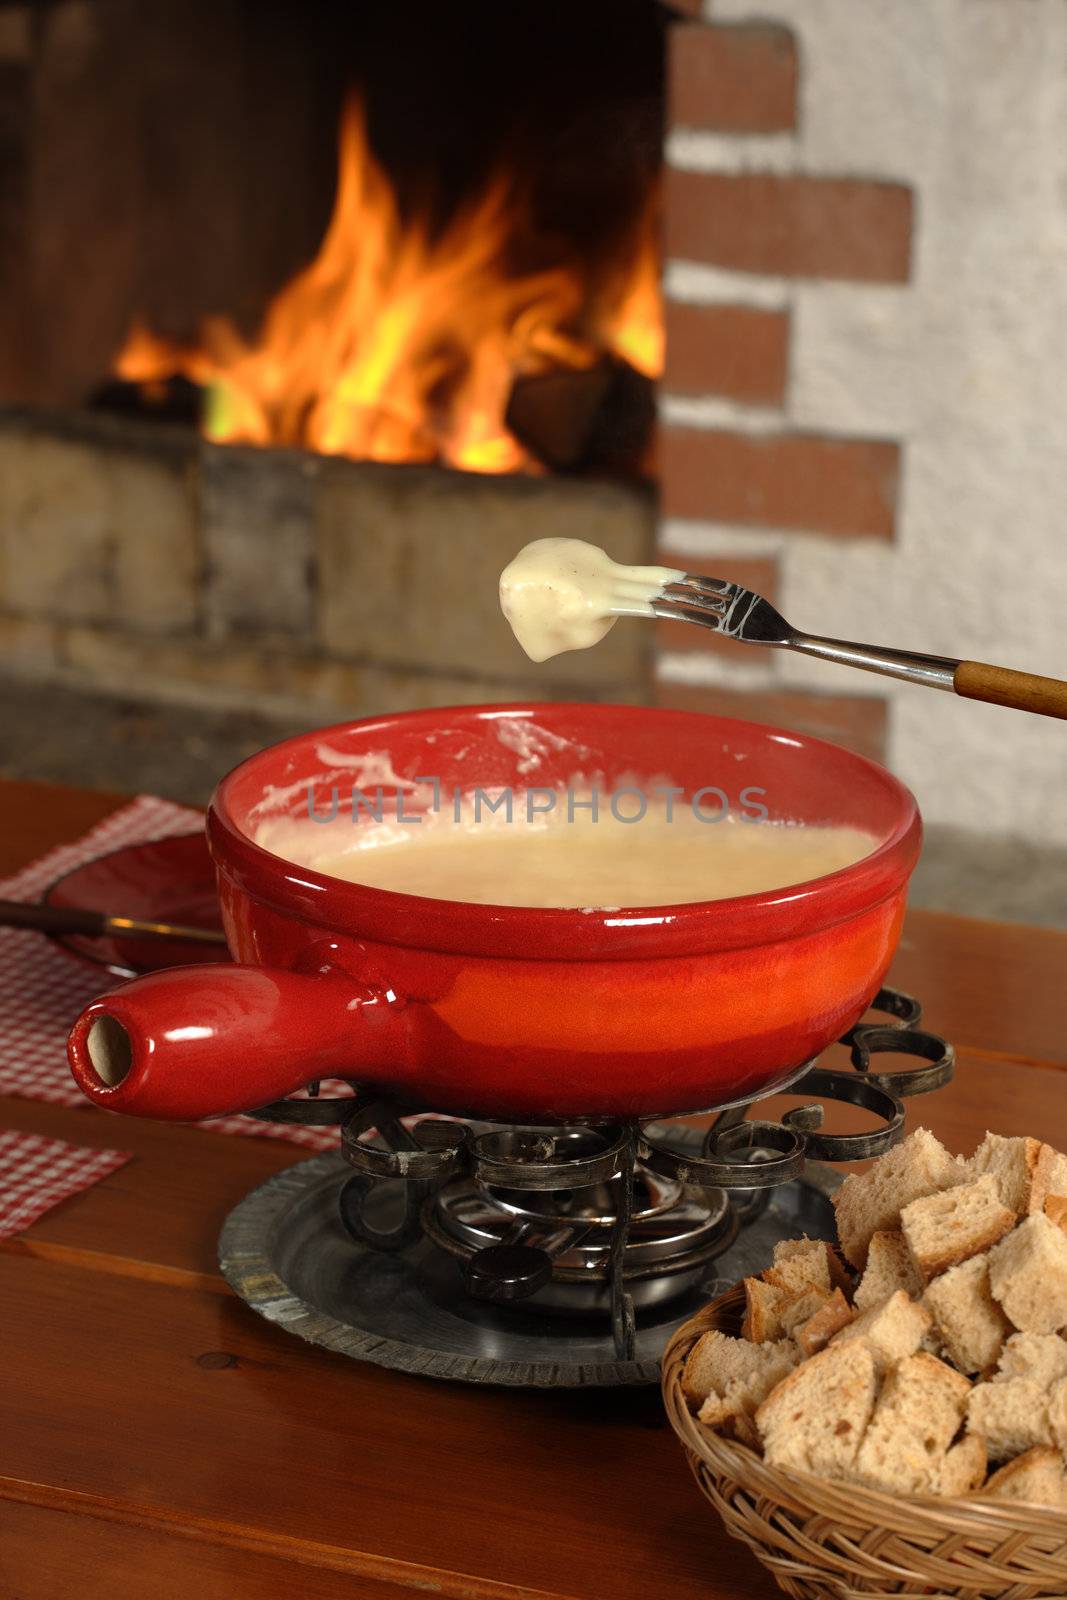 Bread being dipped into the melted cheese in the fondue bowl.